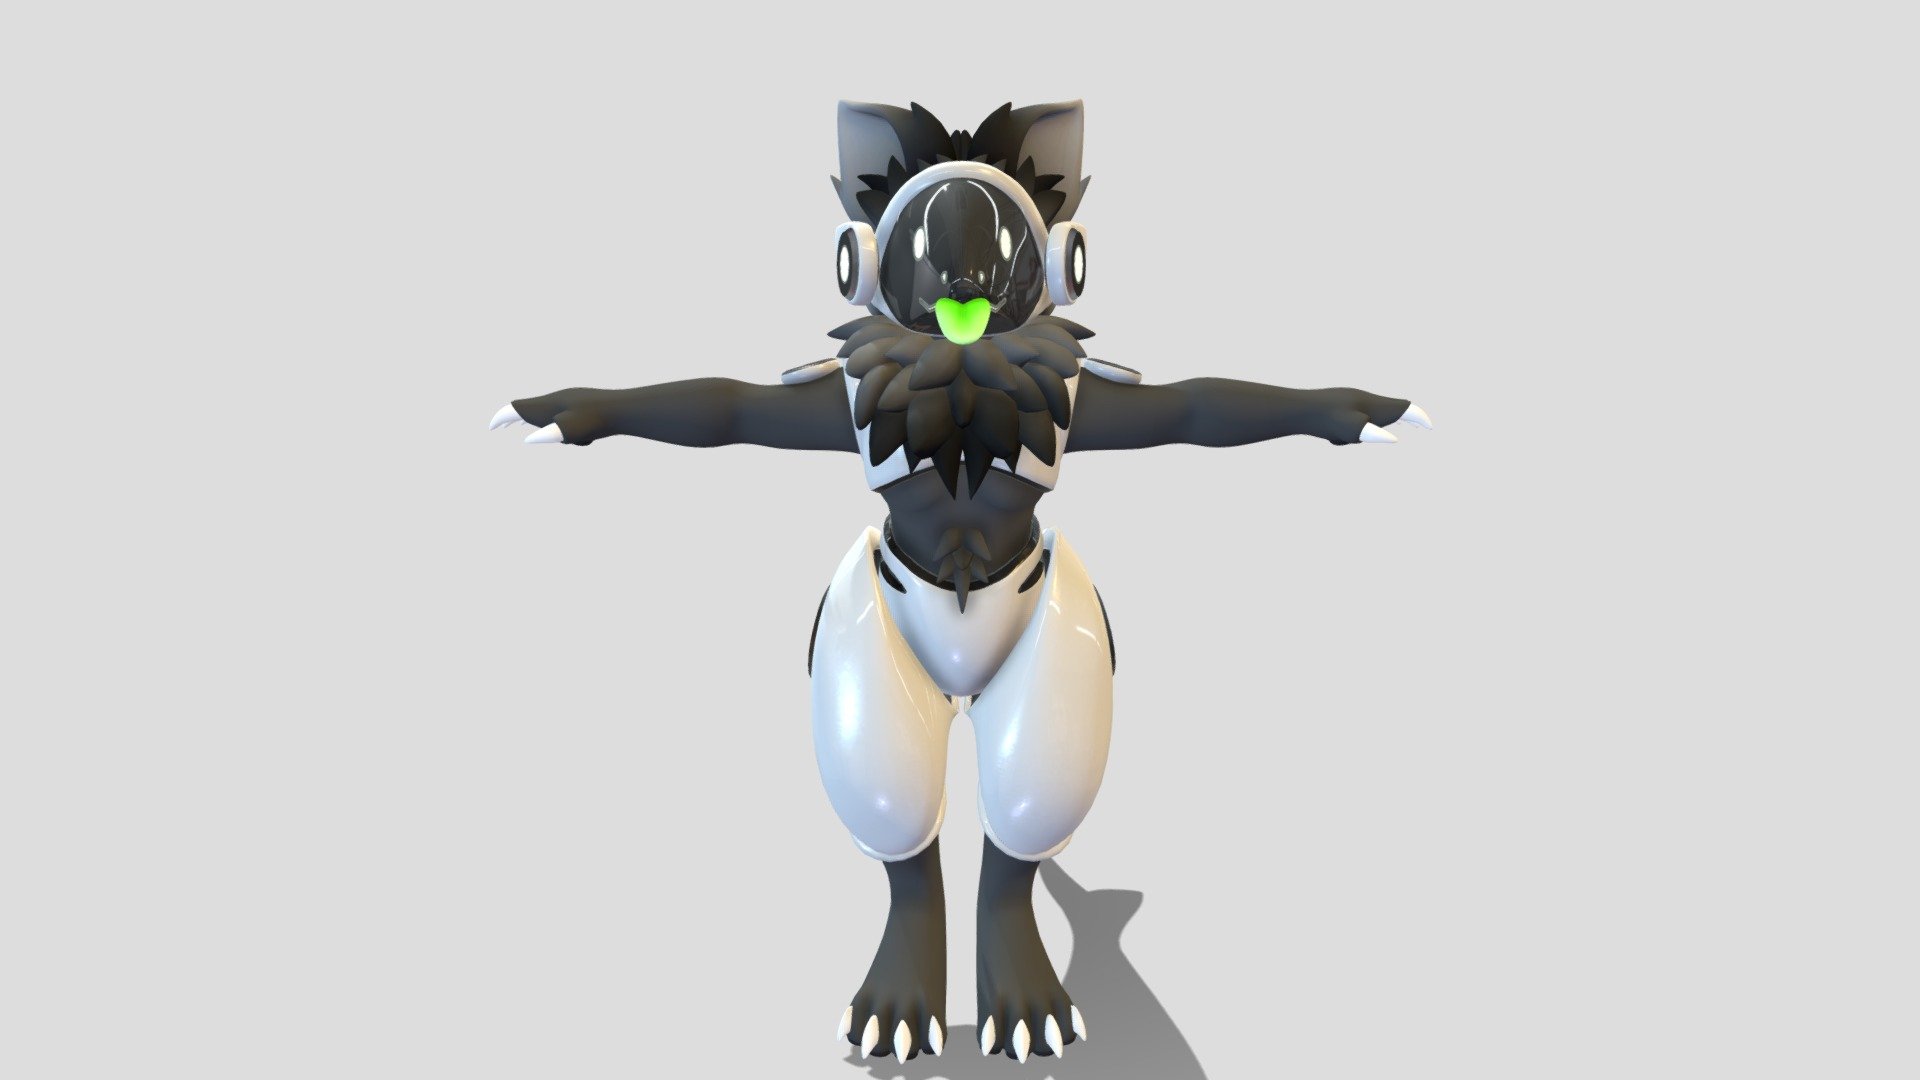 VR ready Protogen avatar! Available on Patreon October 2020! https://www.patreon.com/vr_zab after it leaves Patreon, check for it on my Gumroad (vr_zab)! All my links are here: https://linktr.ee/vr_zab

Full body compatible, Quest version included, with a High and Low poly version too! - Protogen - VRChat & VTuber Avatar - 3D model by Zab (@lixyco) 3d model